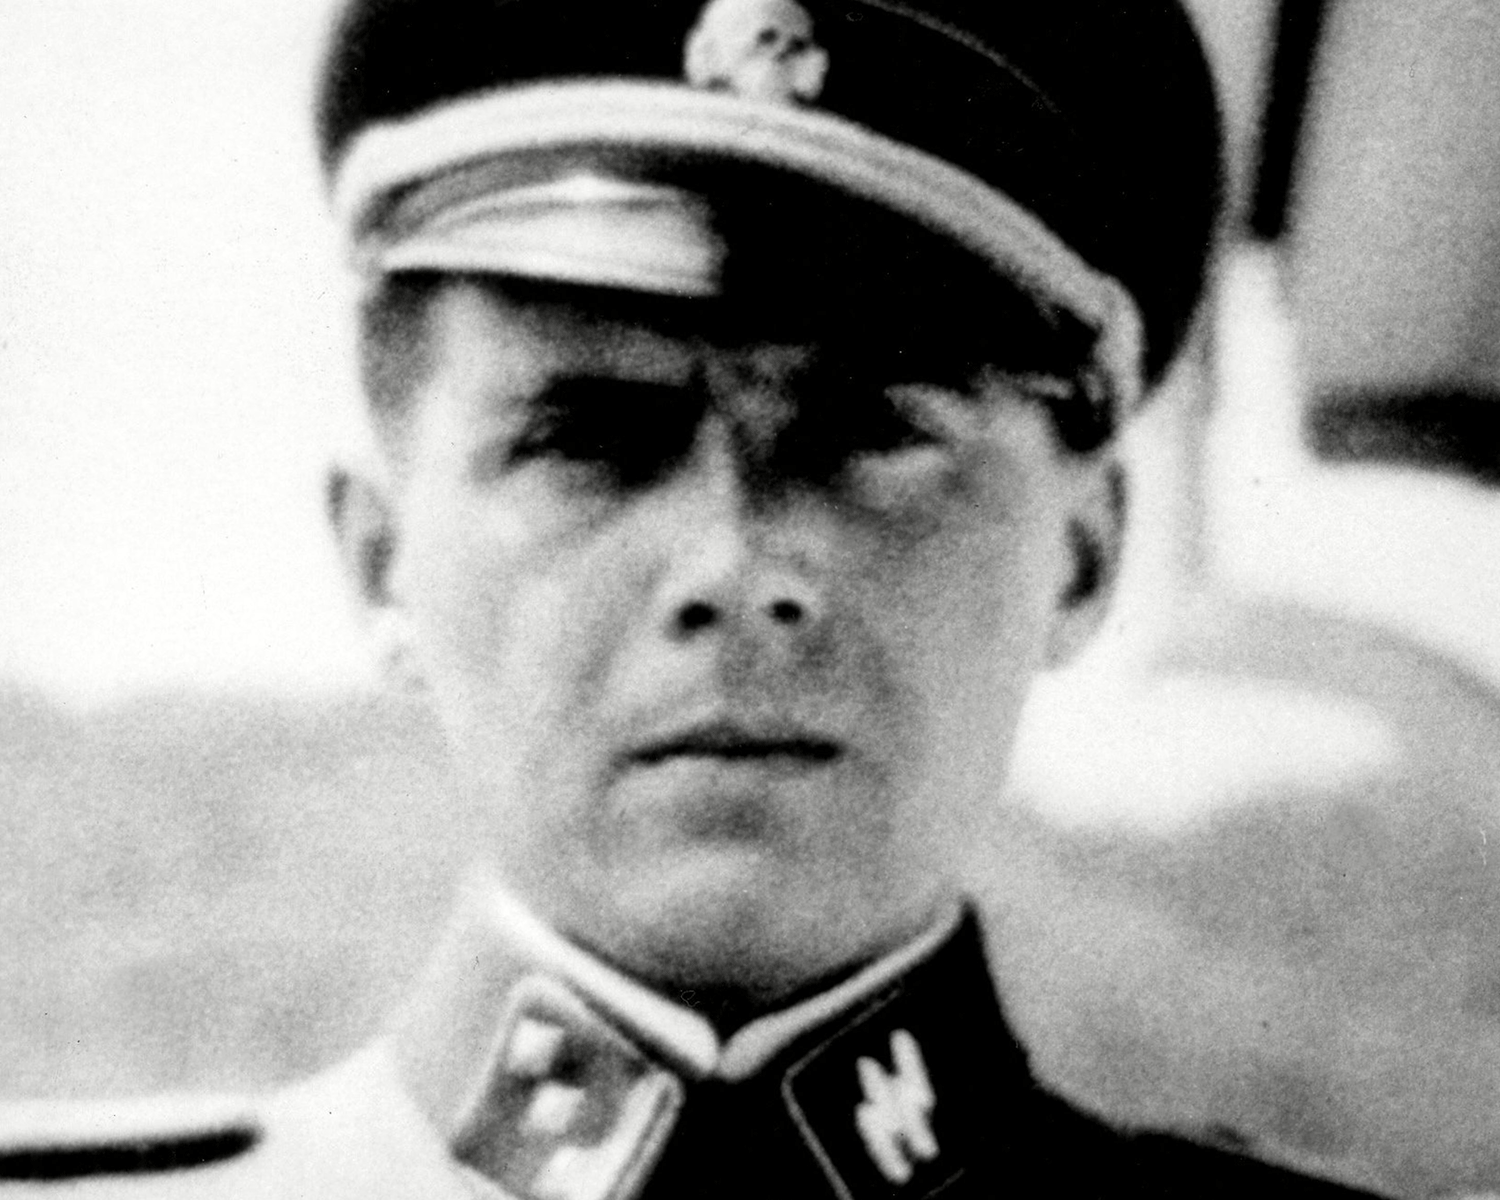 Josef Mengele escaped capture and lived in freedom in South America until his death in 1979